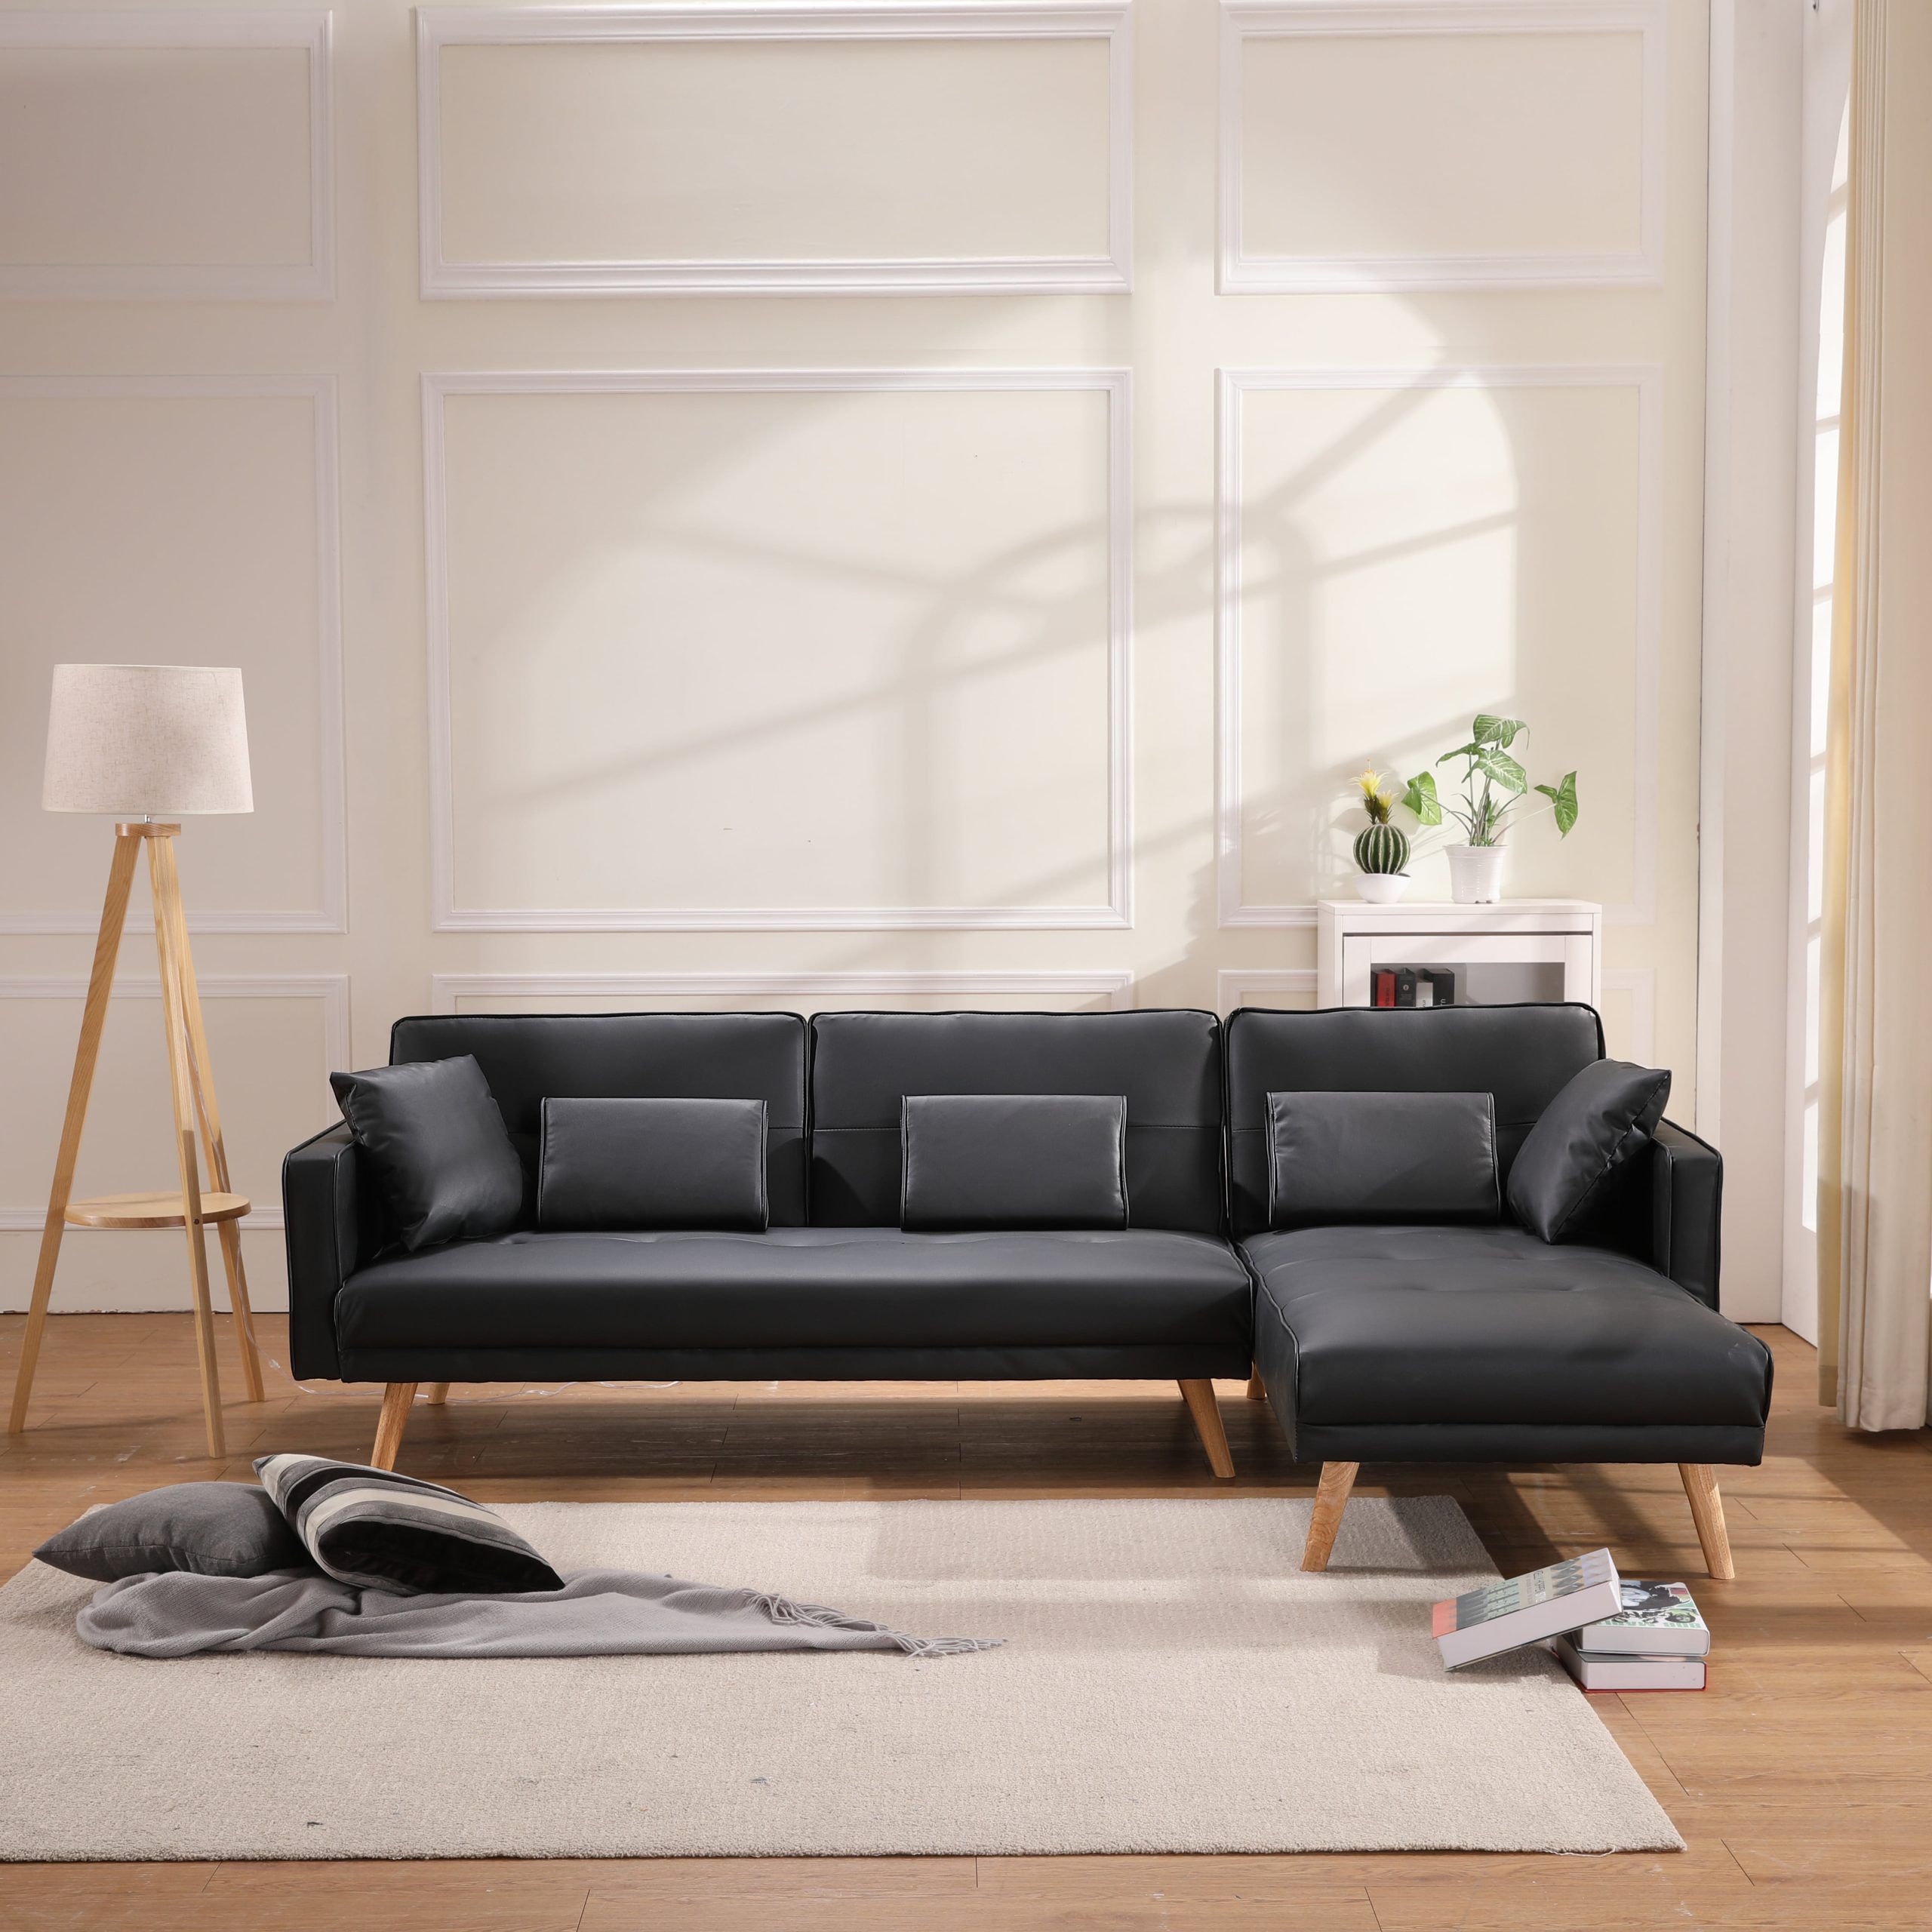 Sectional Sofa For Living Room, Modern Leather 3 Seat Sofa Bed, Futon Inside 3 Seat L Shaped Sofas In Black (Gallery 15 of 20)